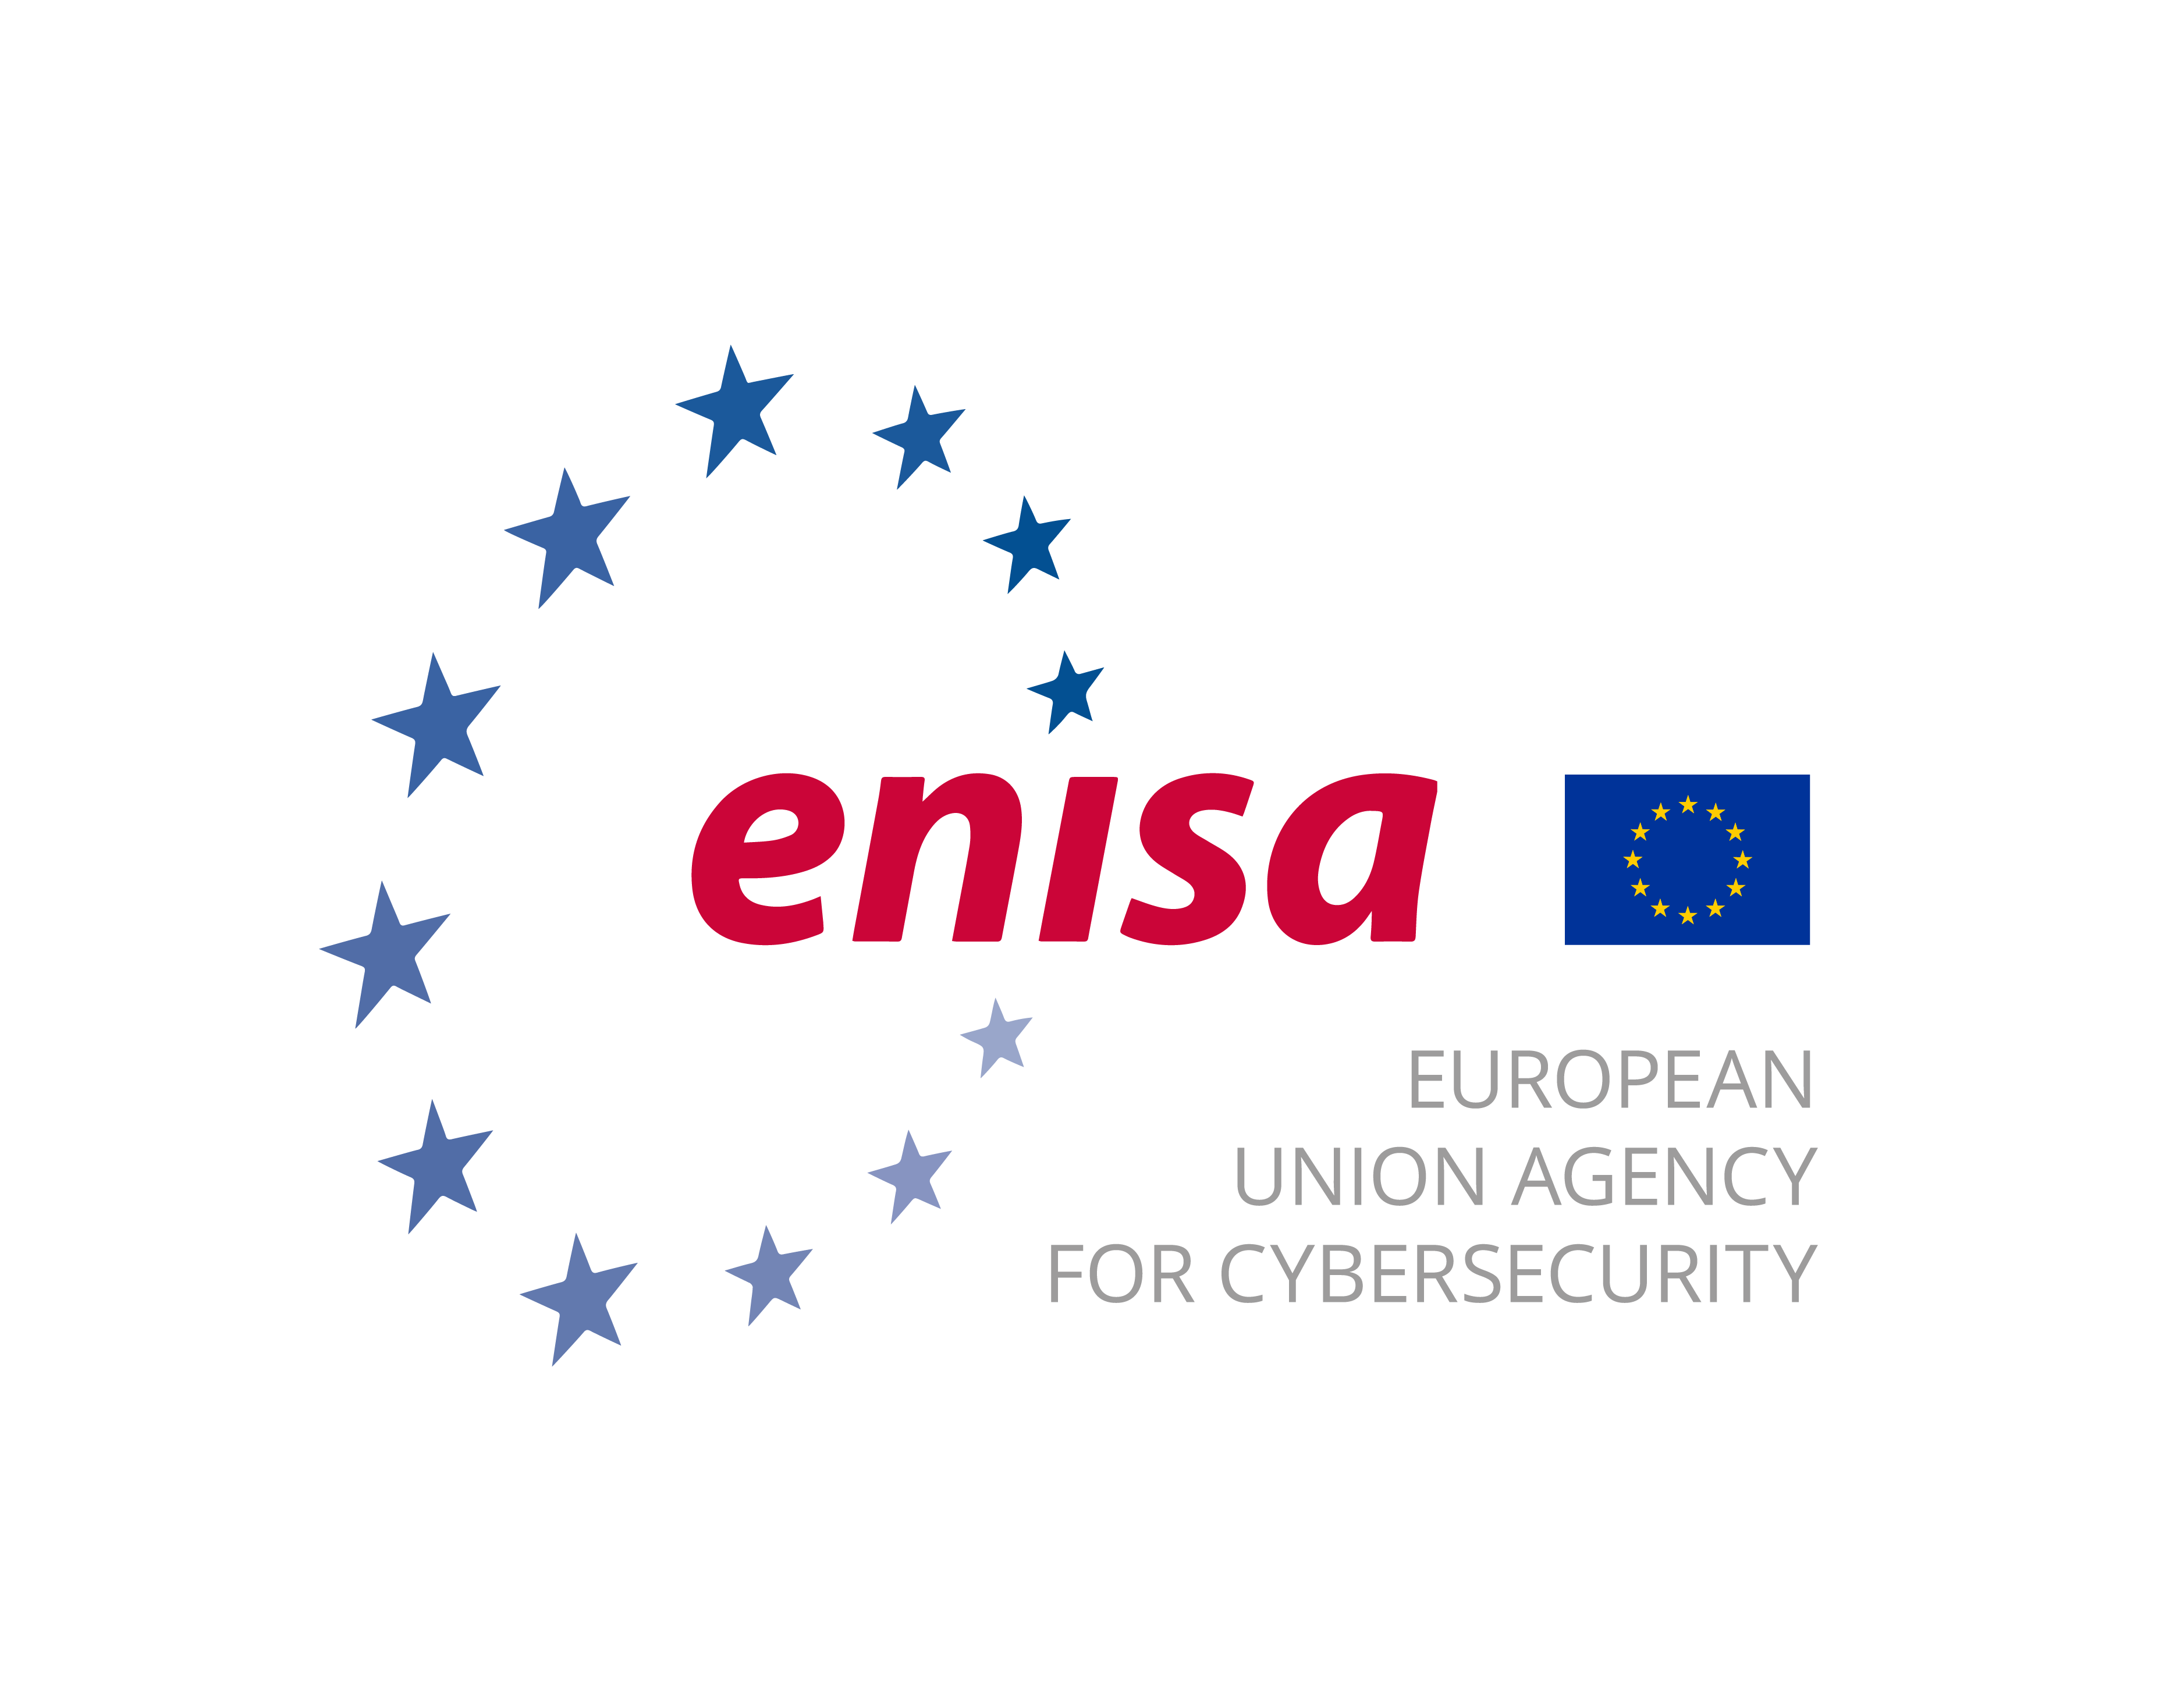 The image shows the logo of ENISA